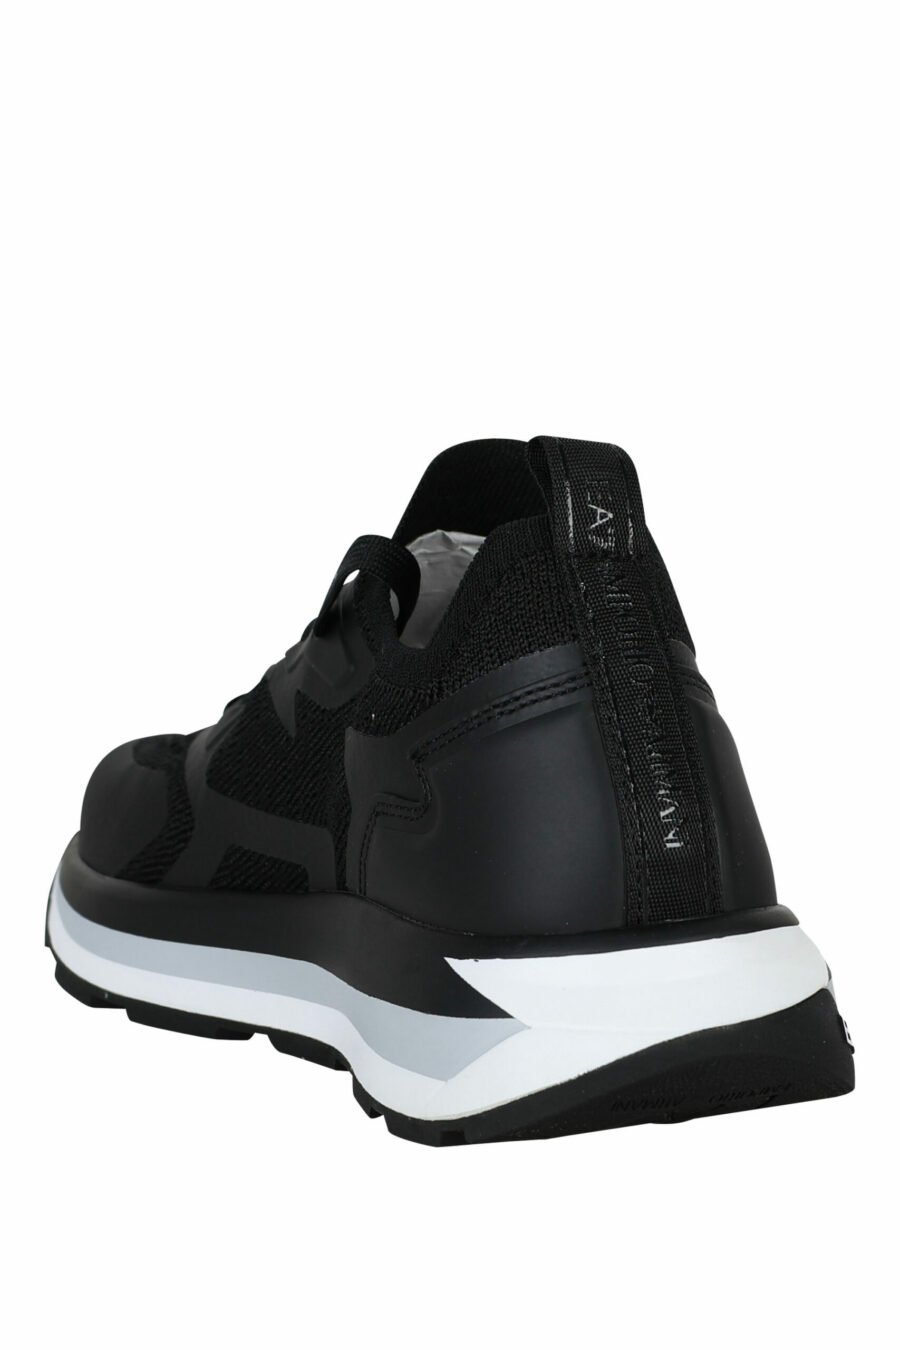 Black trainers with white "lux identity" maxilogo and white sole - 8057163136925 3 scaled